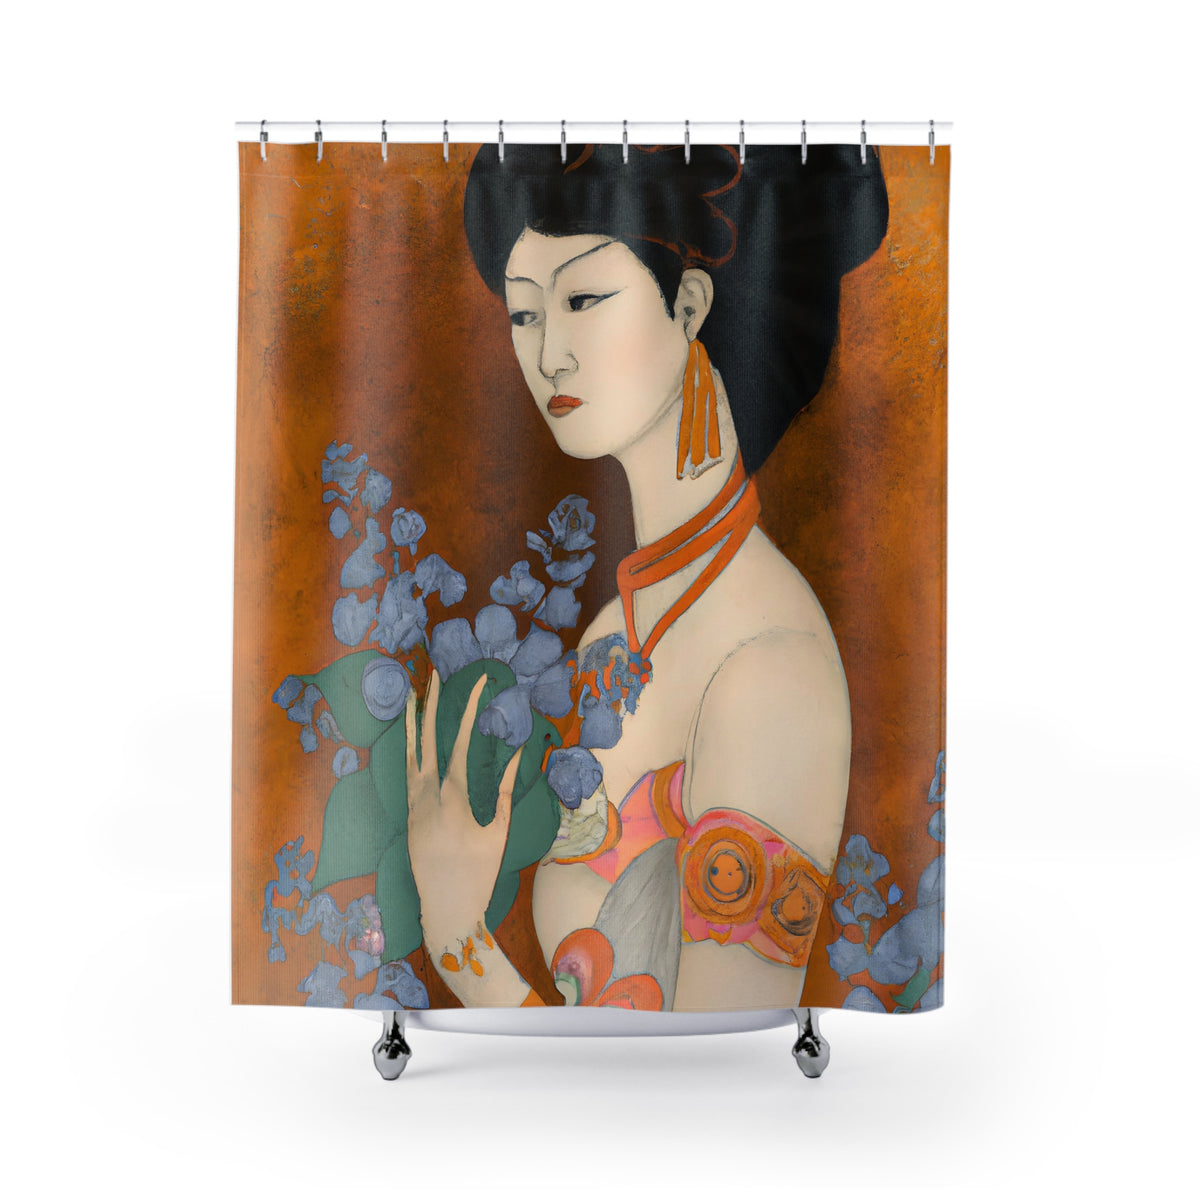 front view of a shower curtain with a painted image of a Geisha holding some violets